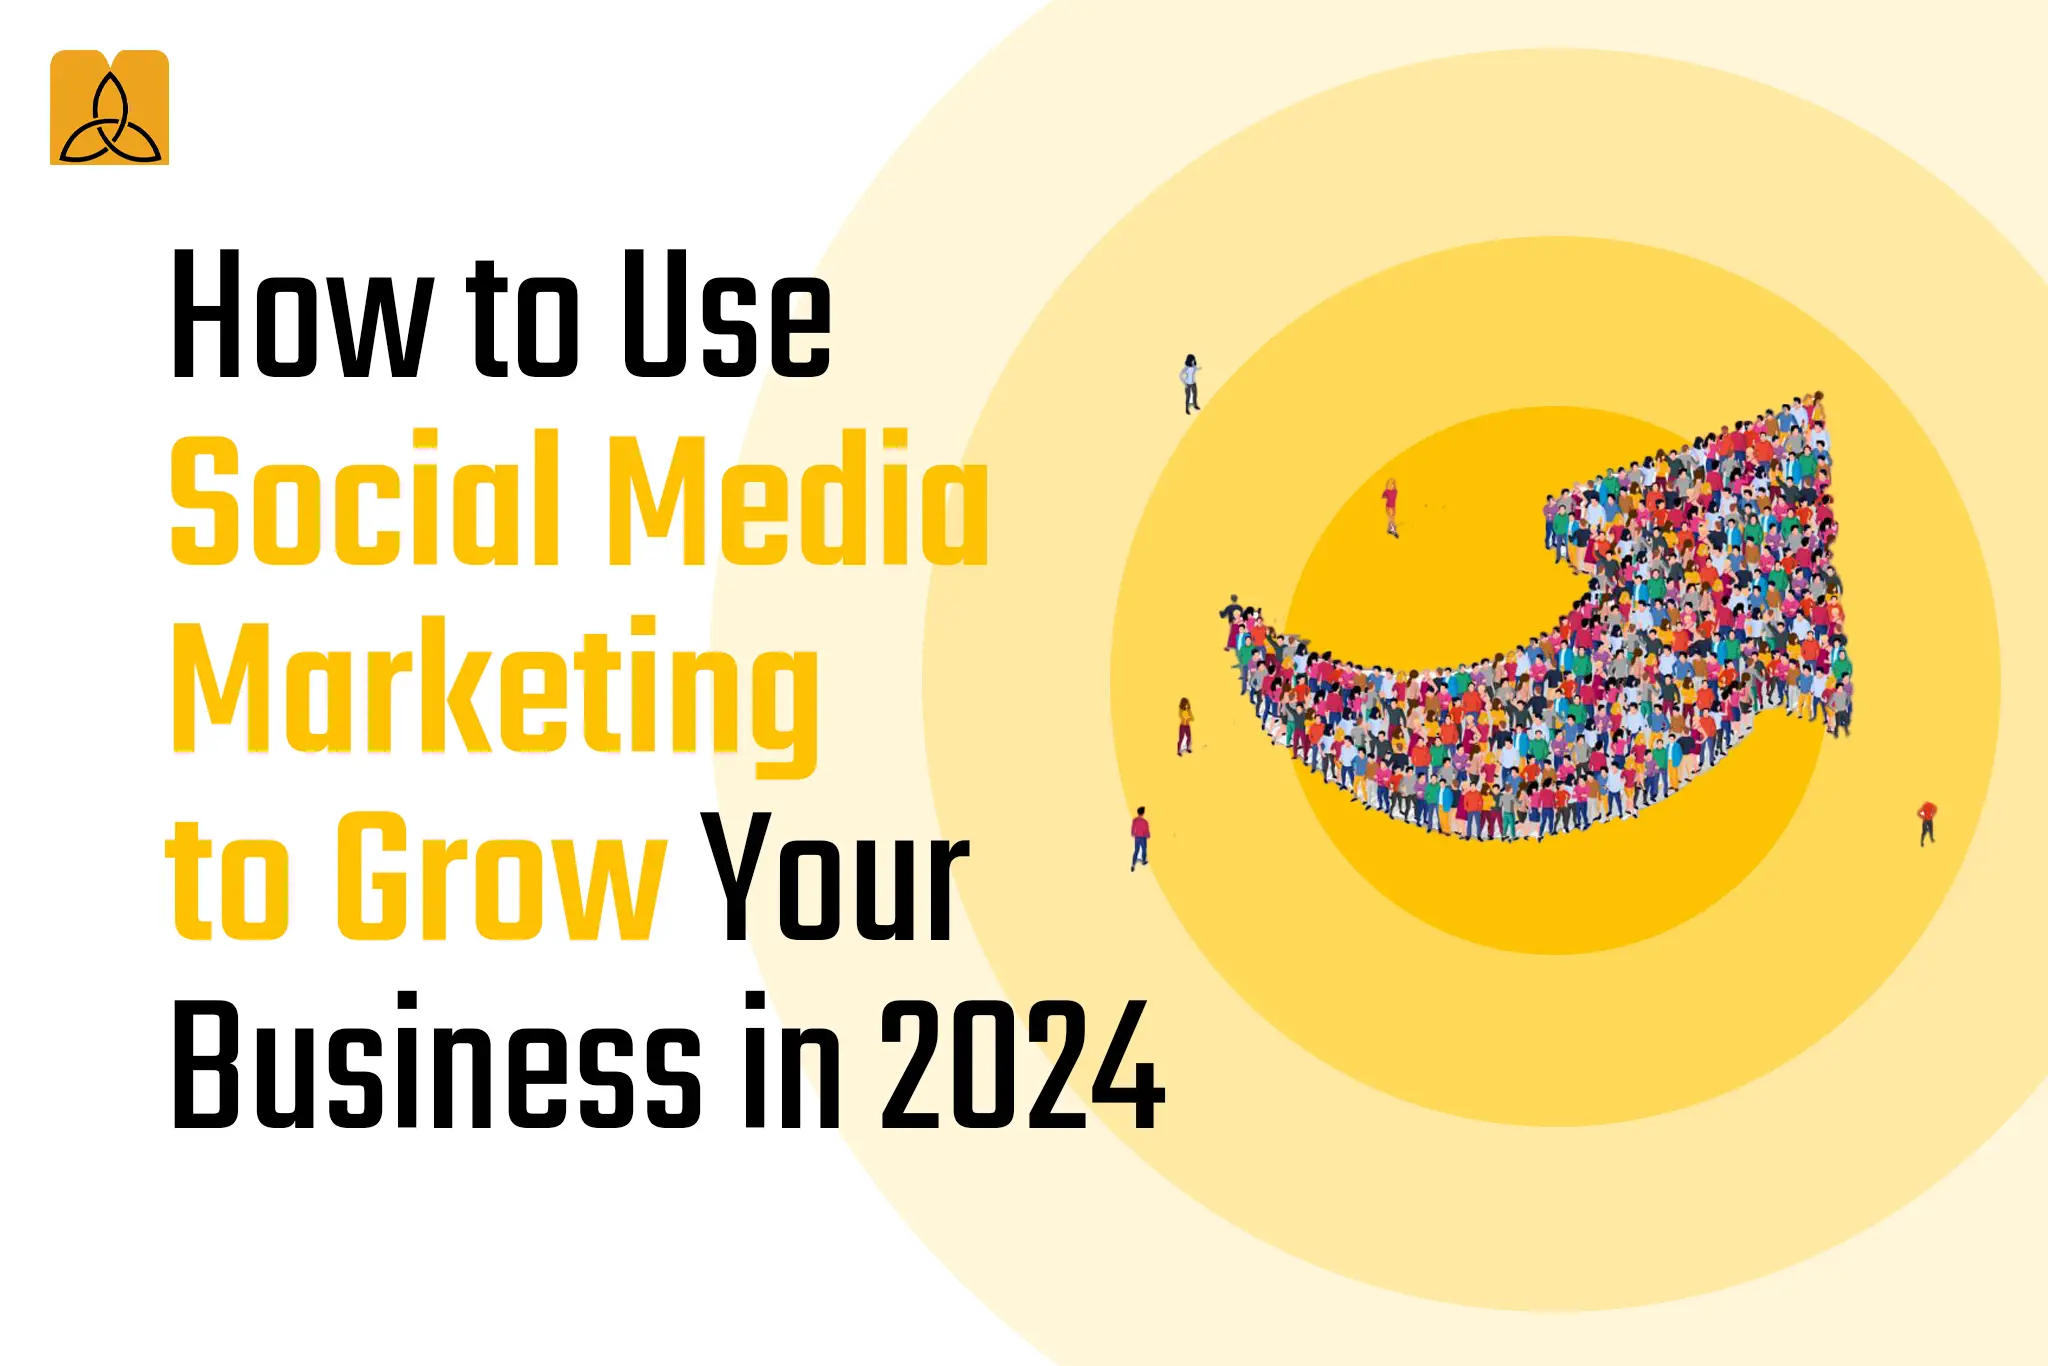 Social Media Marketing to Grow Your Business in 2024